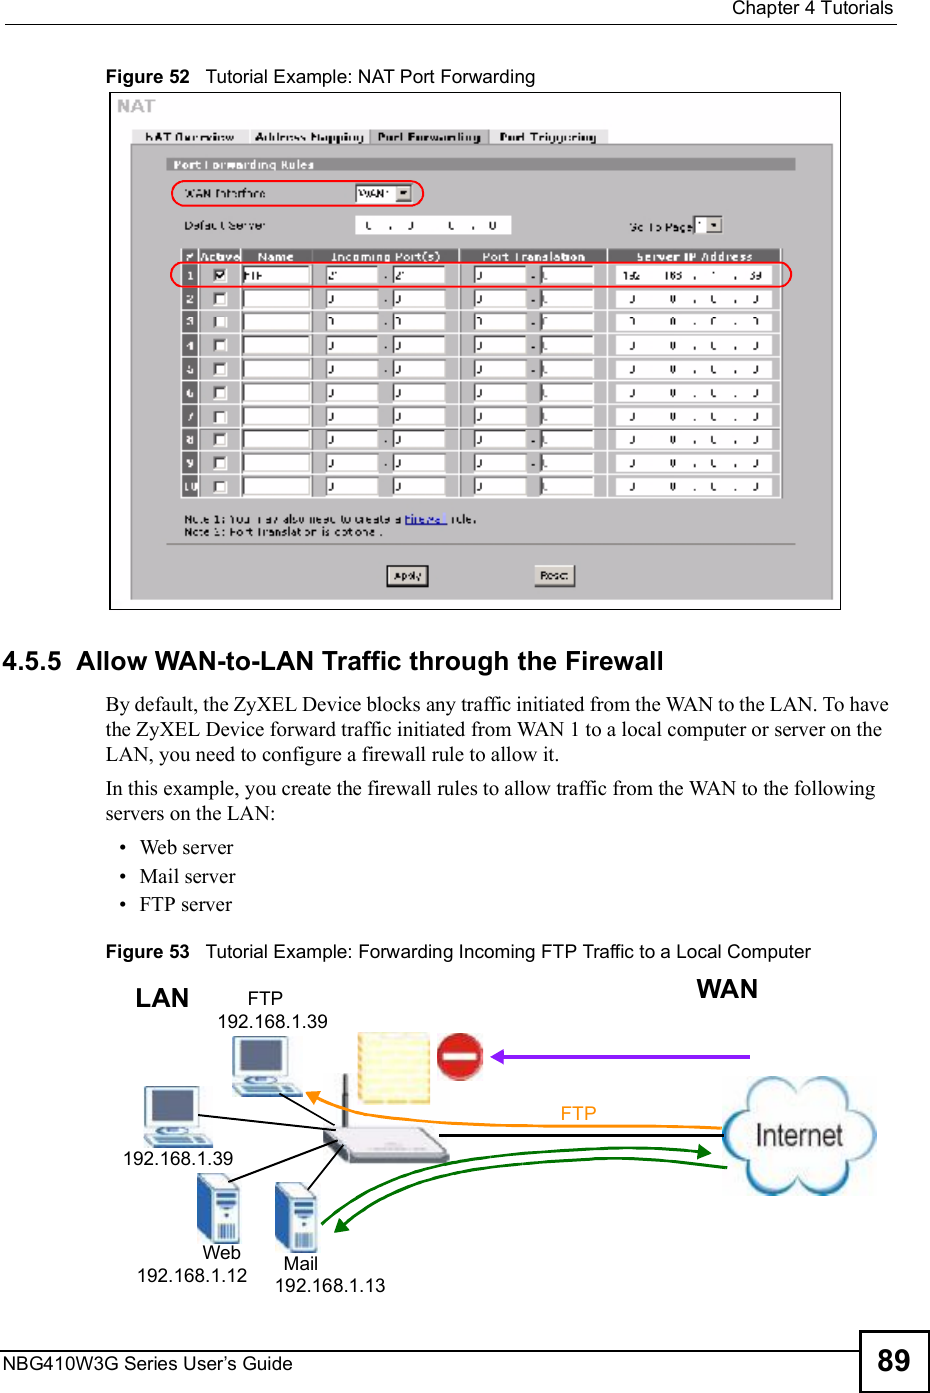  Chapter 4TutorialsNBG410W3G Series User s Guide 89Figure 52   Tutorial Example: NAT Port Forwarding4.5.5  Allow WAN-to-LAN Traffic through the FirewallBy default, the ZyXEL Device blocks any traffic initiated from the WAN to the LAN. To have the ZyXEL Device forward traffic initiated from WAN 1 to a local computer or server on the LAN, you need to configure a firewall rule to allow it.In this example, you create the firewall rules to allow traffic from the WAN to the following servers on the LAN: Web server Mail server FTP serverFigure 53   Tutorial Example: Forwarding Incoming FTP Traffic to a Local Computer FTPFTP 192.168.1.39192.168.1.39192.168.1.12 192.168.1.13MailWebWANLAN